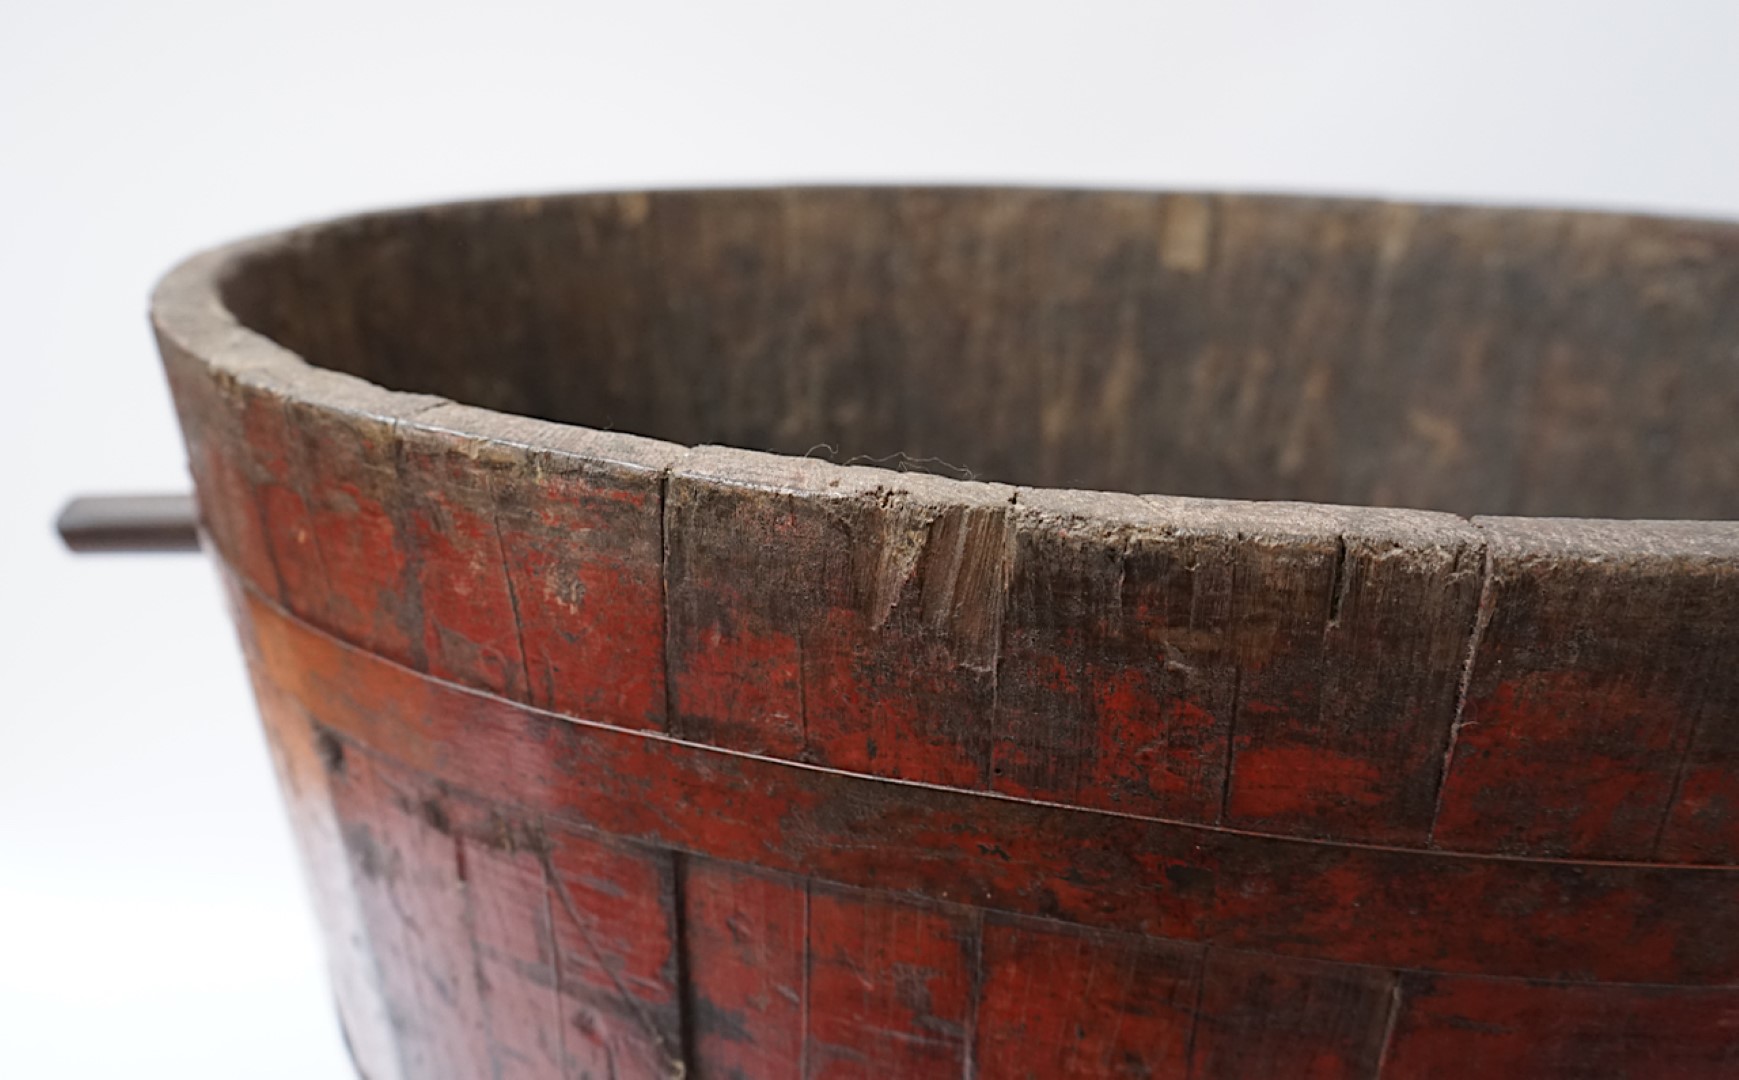 A FRENCH PAINTED STAVED WINE TREADING BASKET OR BUCKET - Image 11 of 11